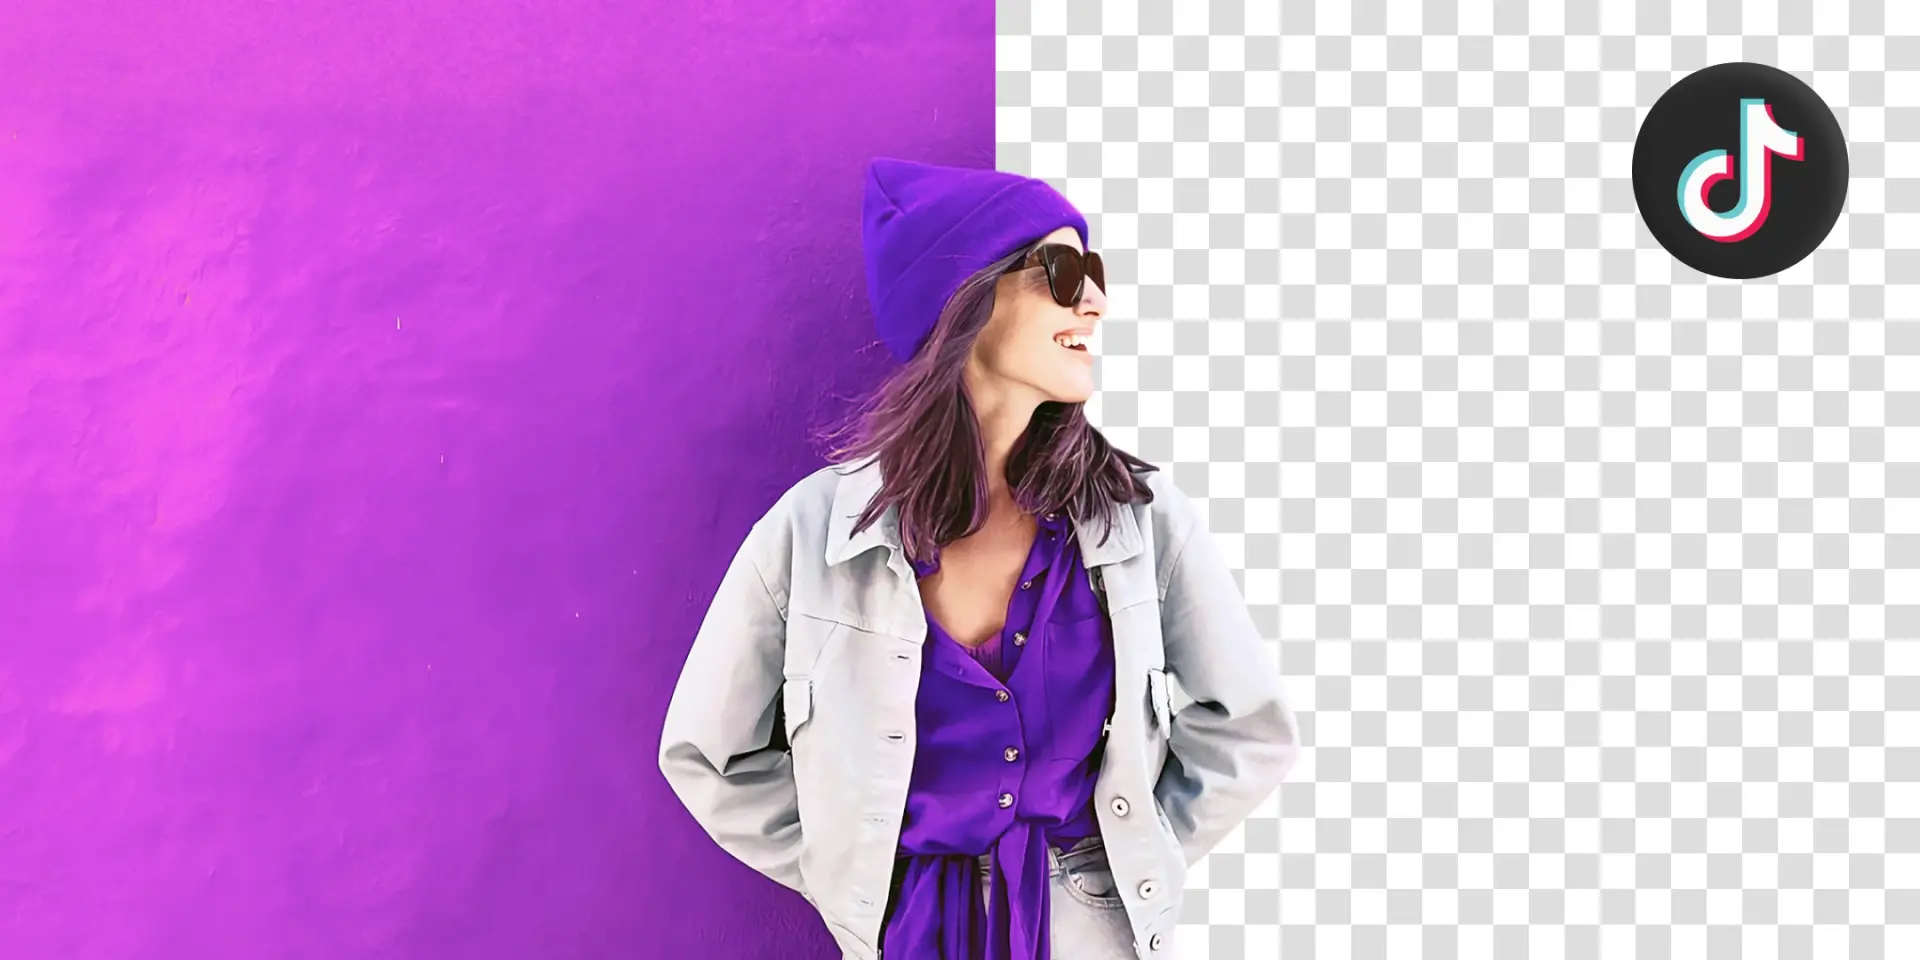 A visual of a woman standing with a purple background on one side and a checkered background on the other side. 